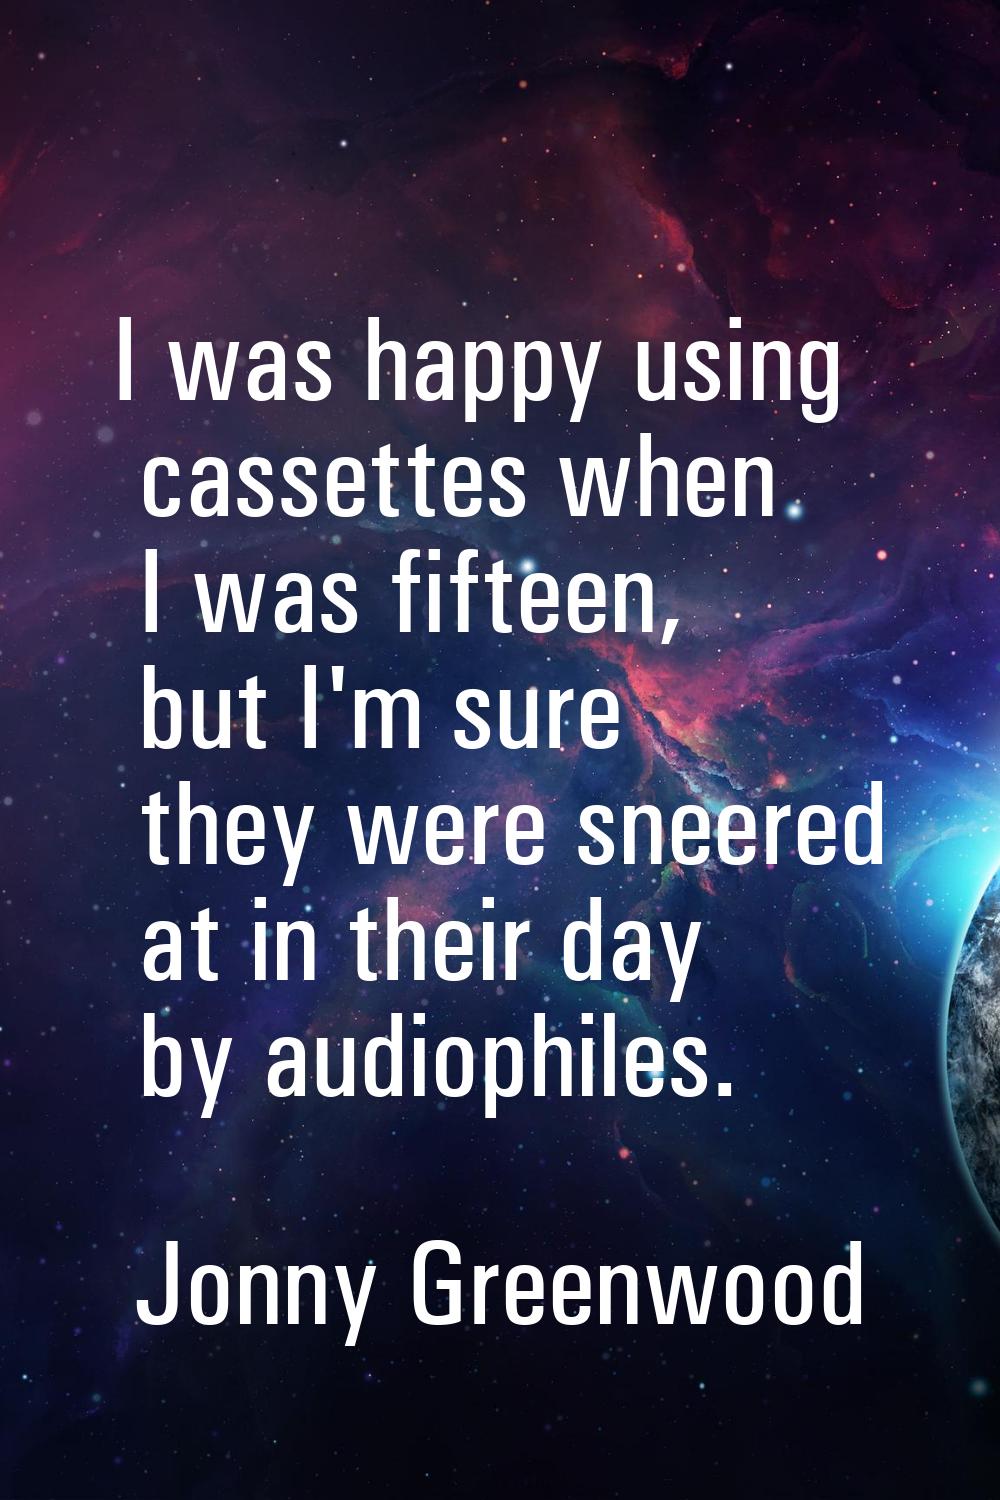 I was happy using cassettes when I was fifteen, but I'm sure they were sneered at in their day by a